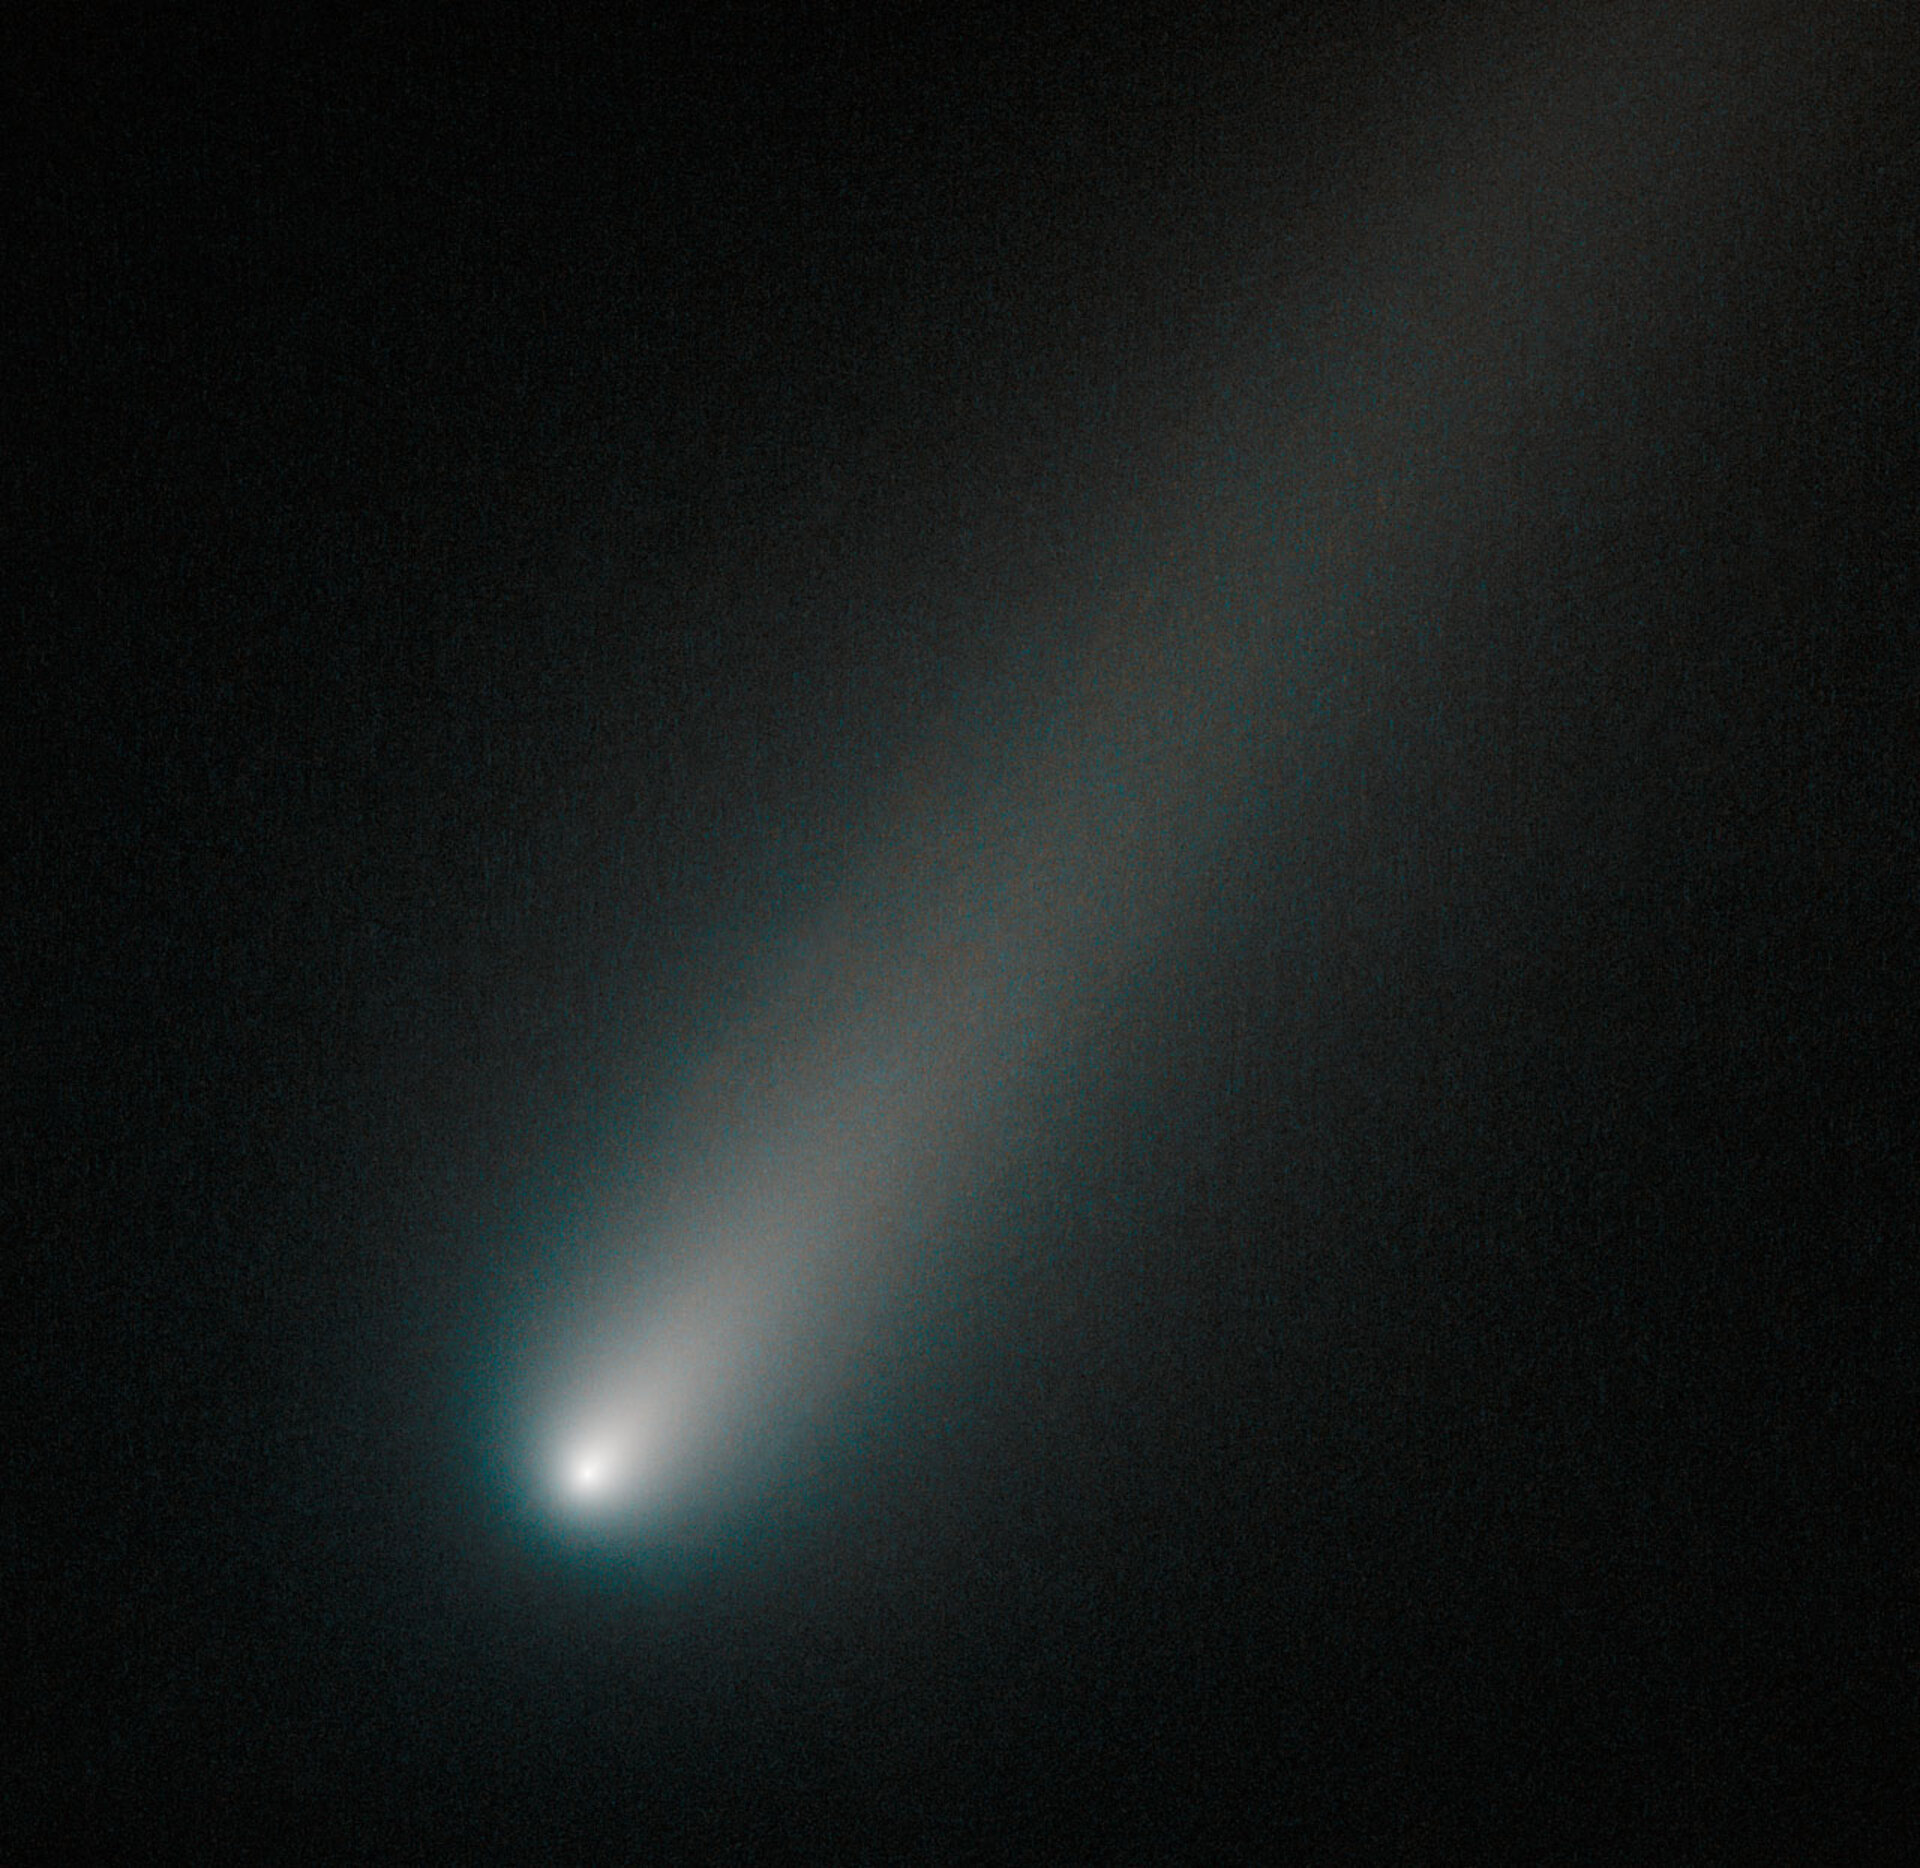 Hubble’s new view of Comet ISON